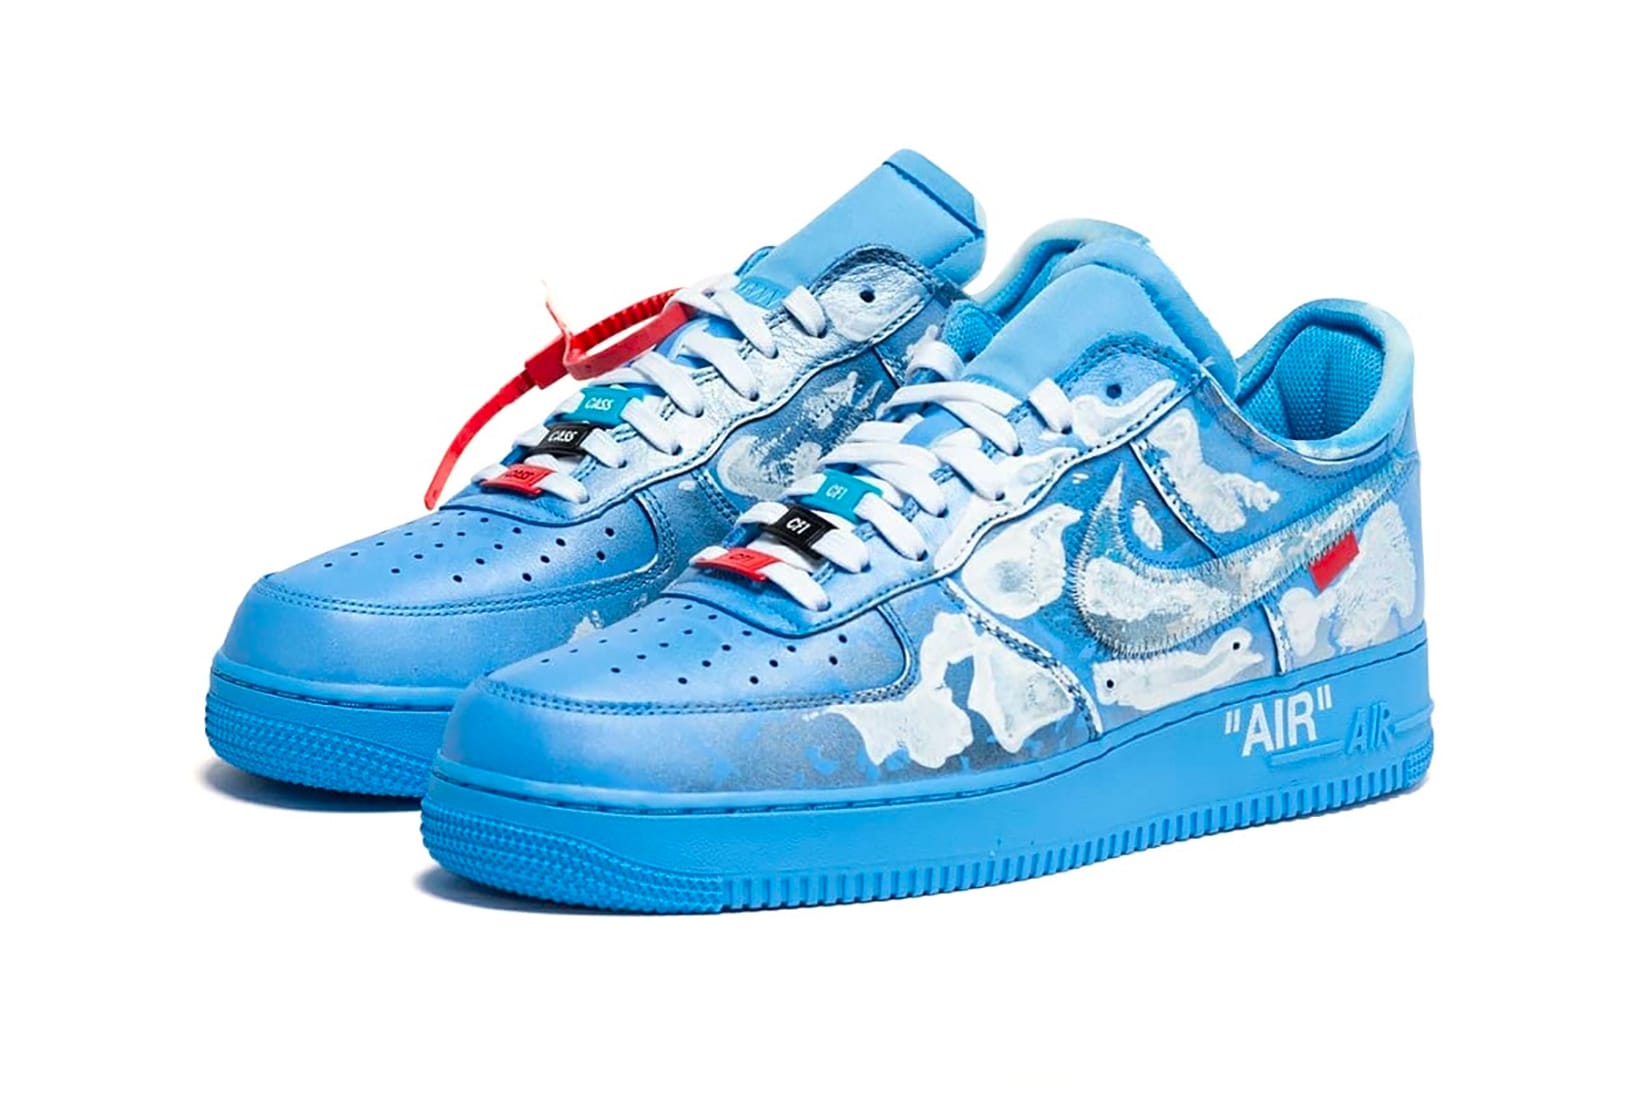 mca air force 1 release